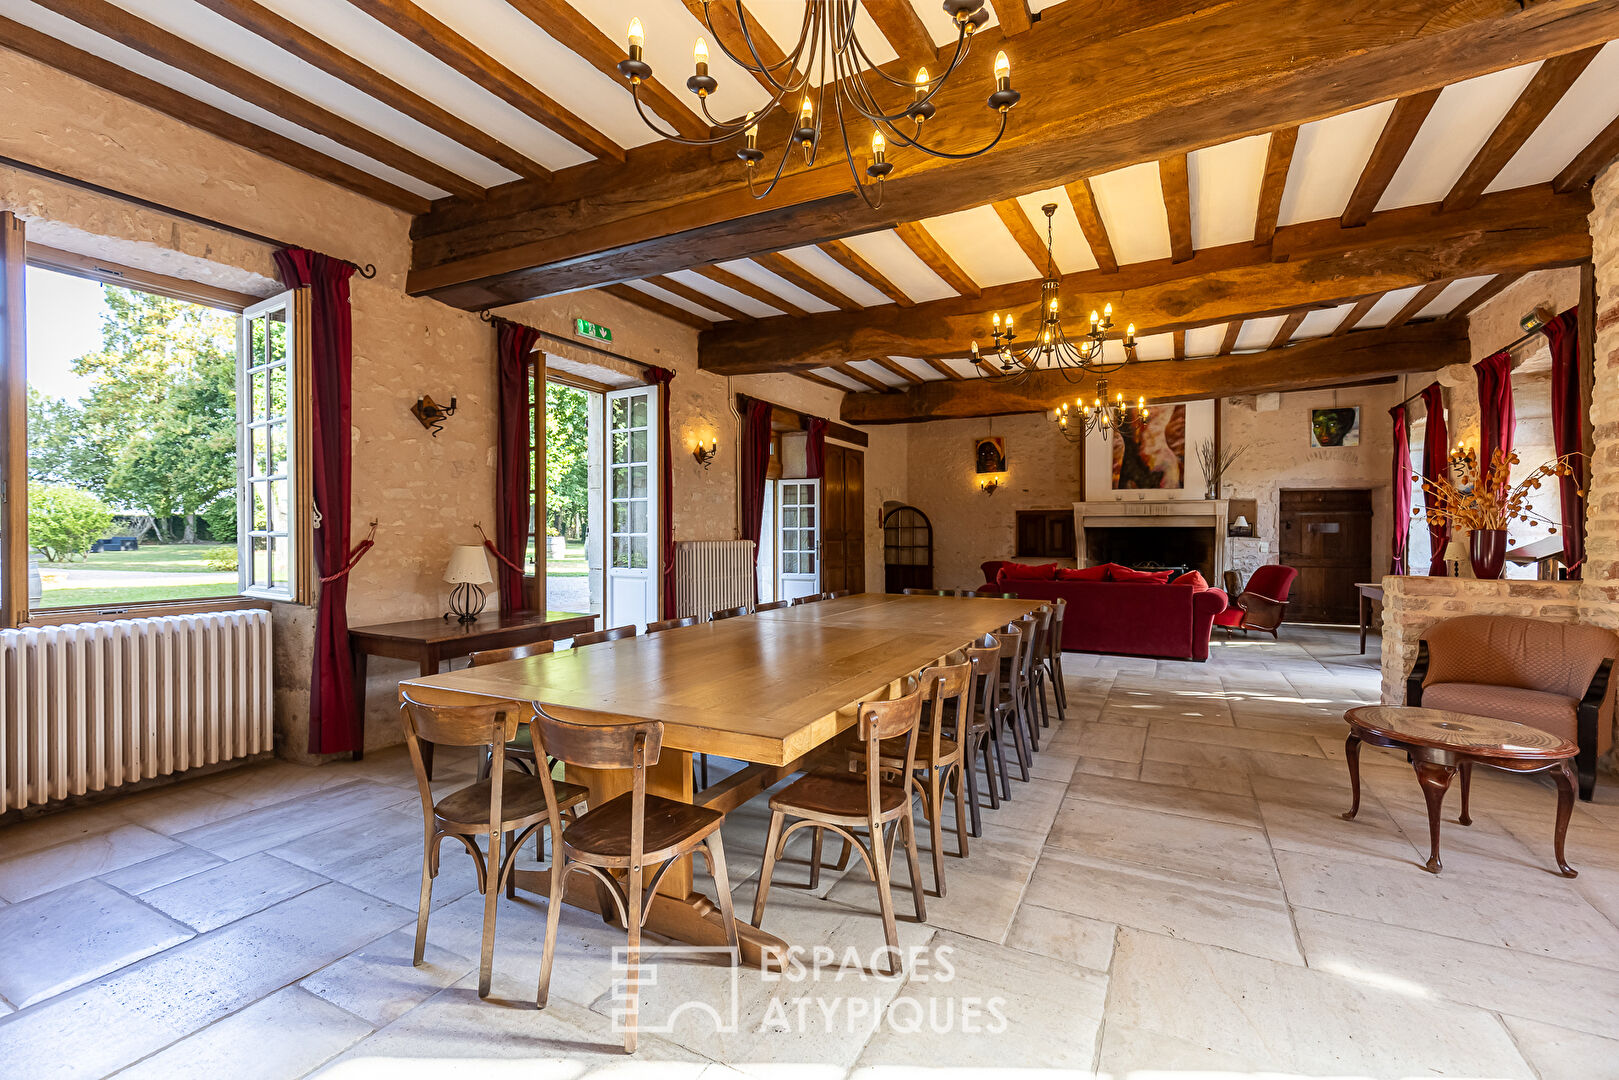 10 hectare property with its 14th century manor and outbuildings